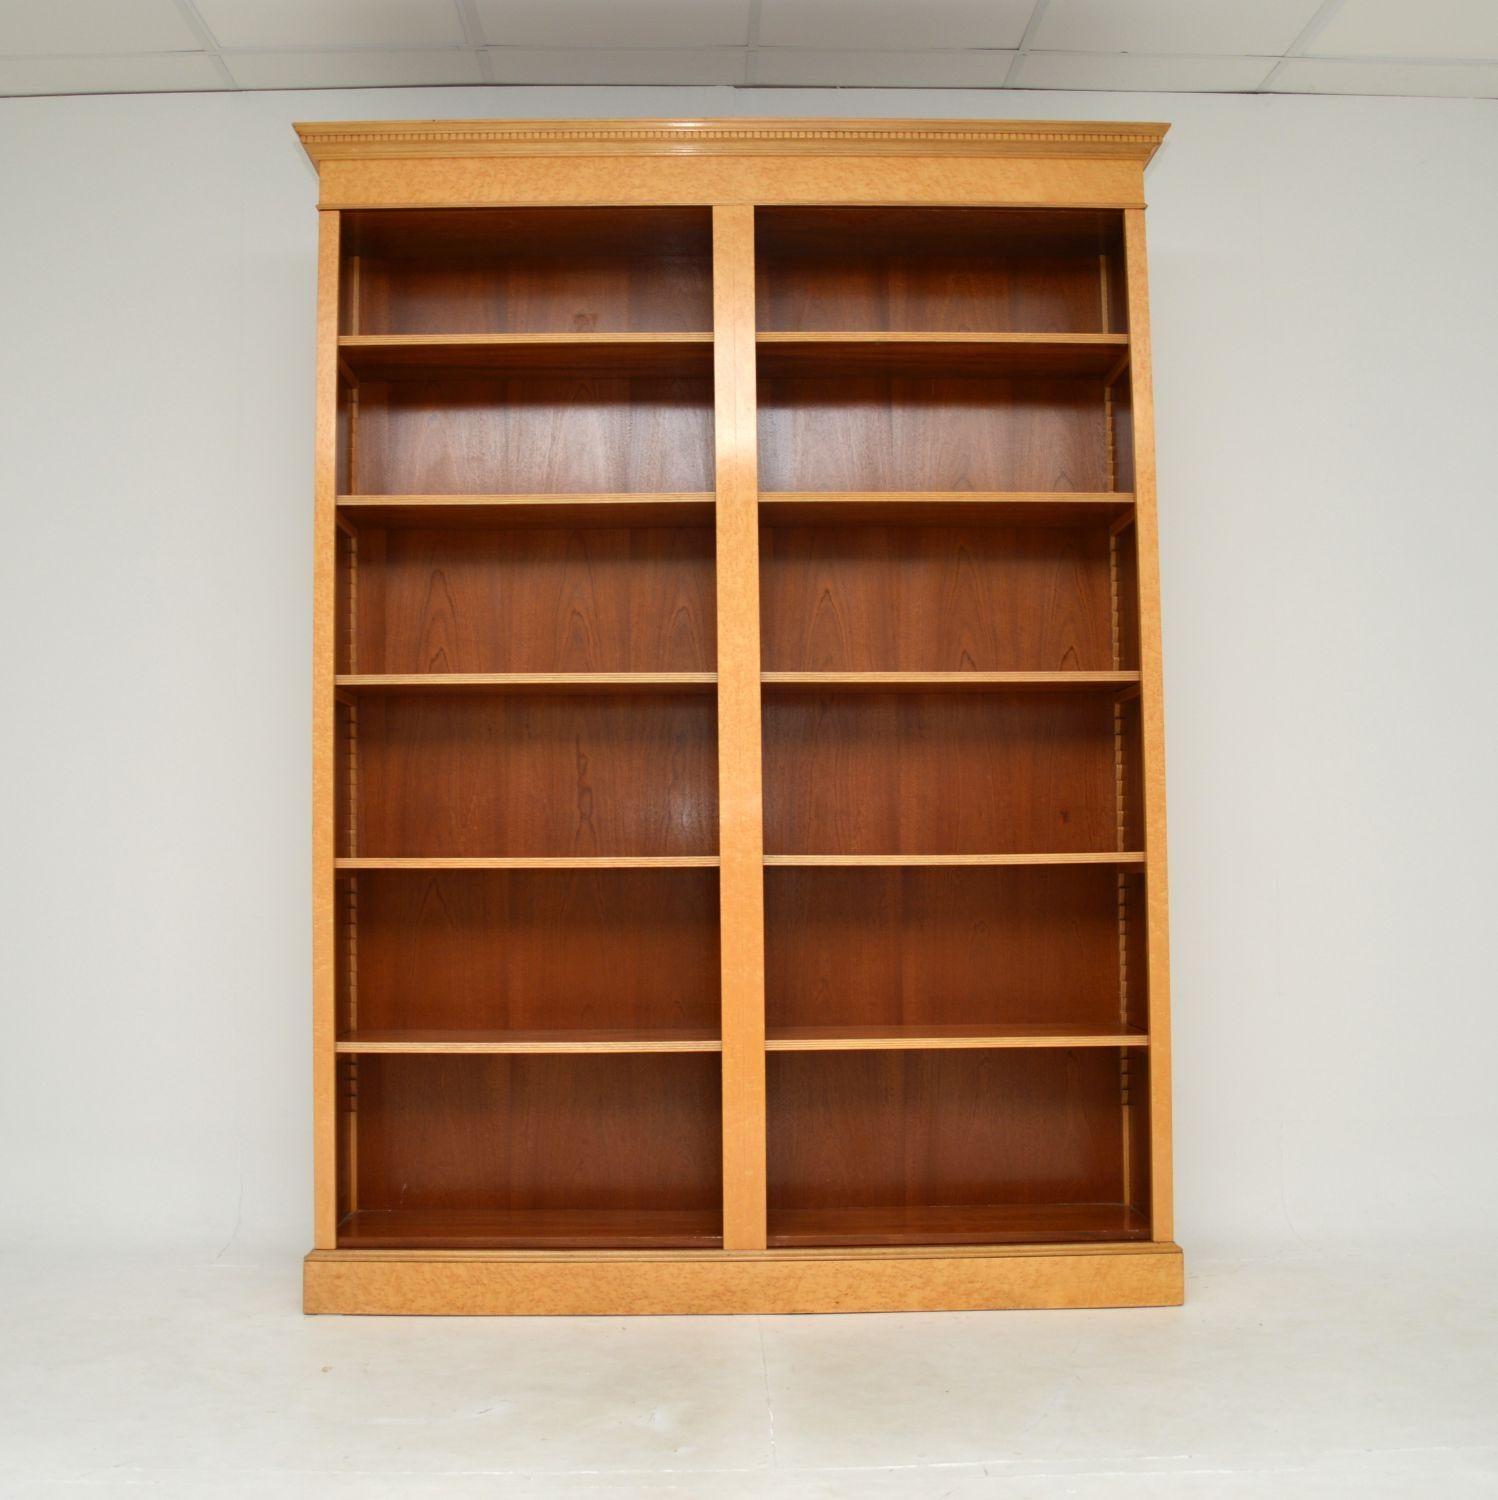 A large and impressive antique Victorian style birds eye maple open bookcase. This was made in England, it dates from around the 1960’s.

It is of superb quality and is a great size, offering lots of storage space with its many adjustable shelves.